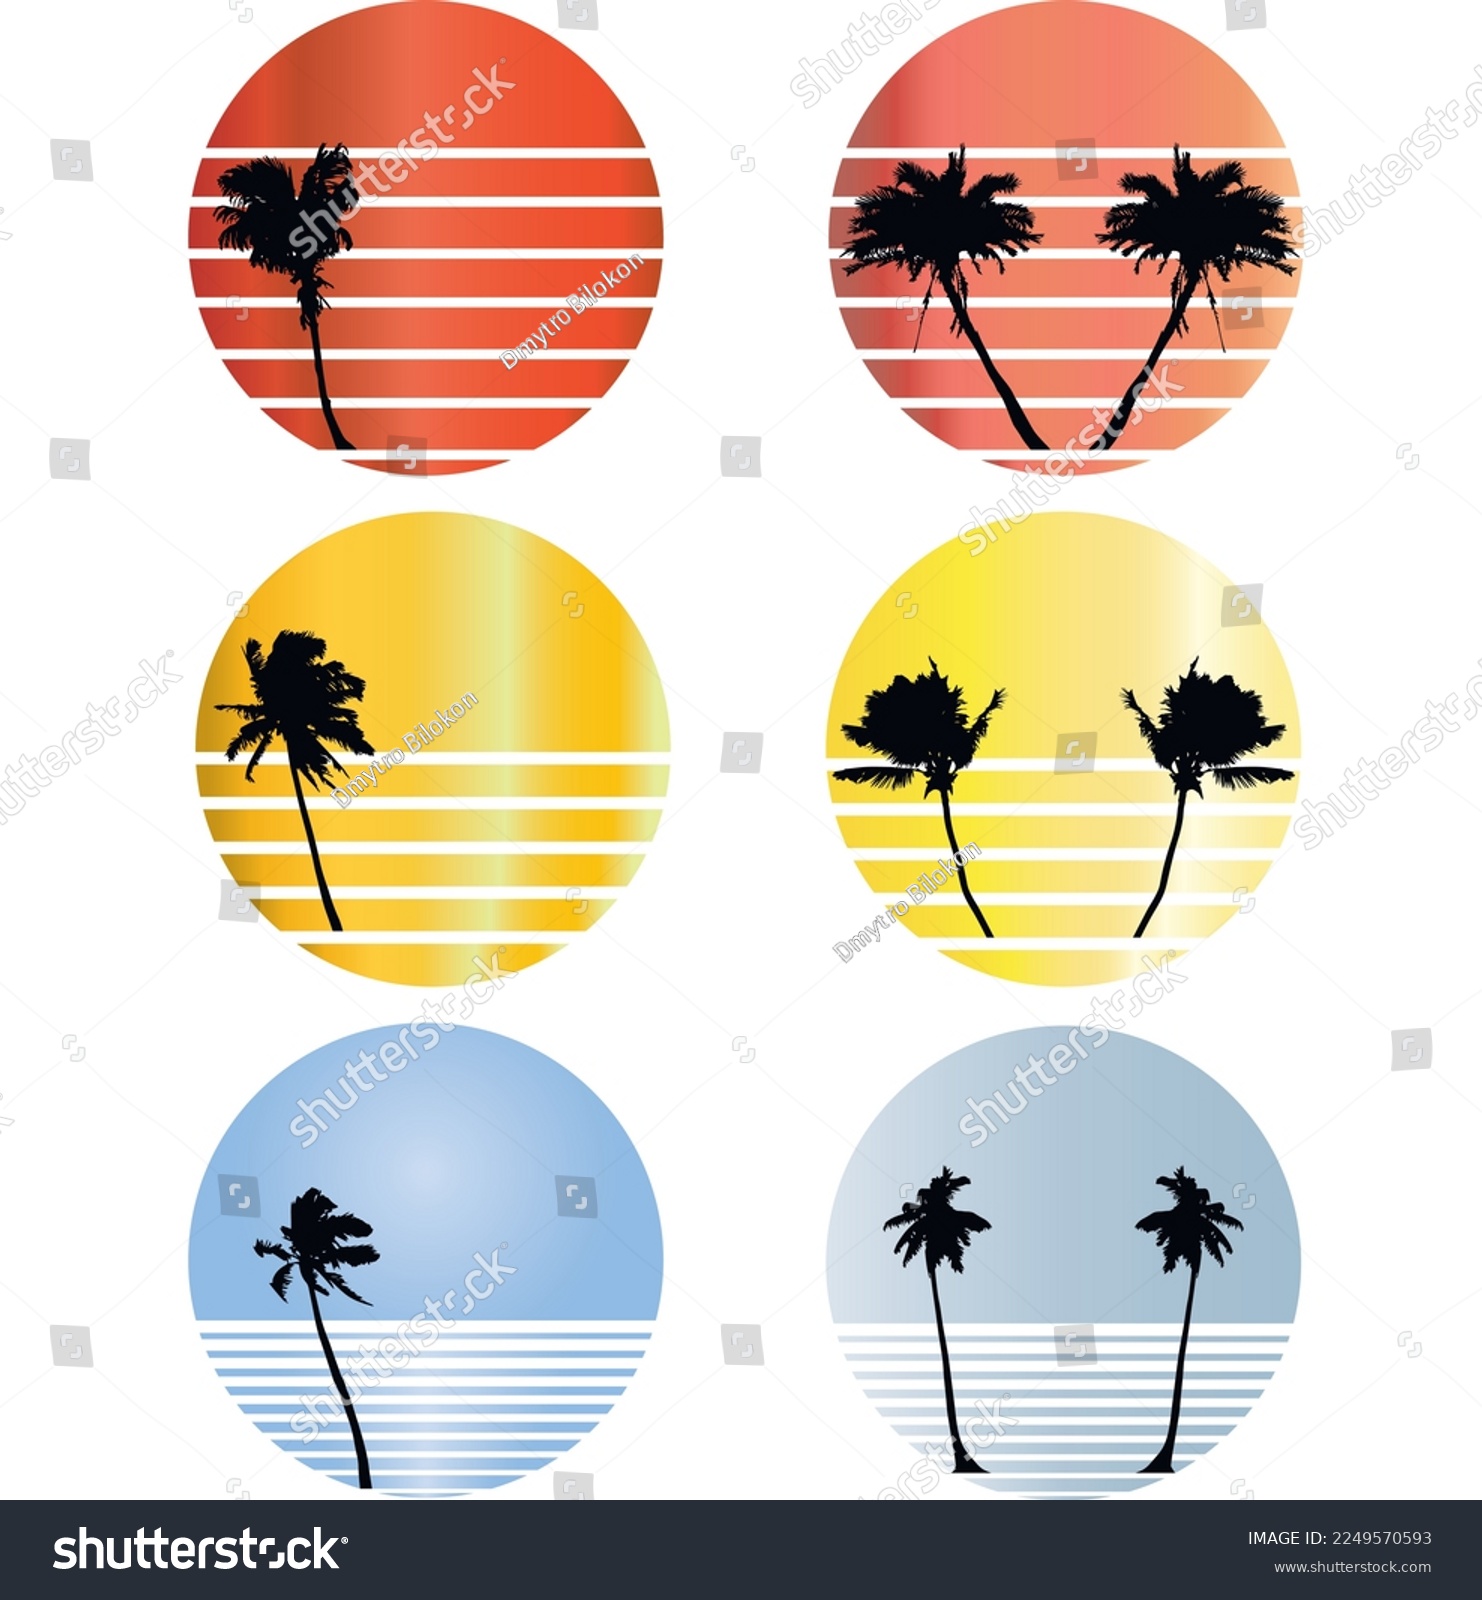 SVG of Sunset retro icon and palm tree set, vintage sun in 80s style, SVG vector svg